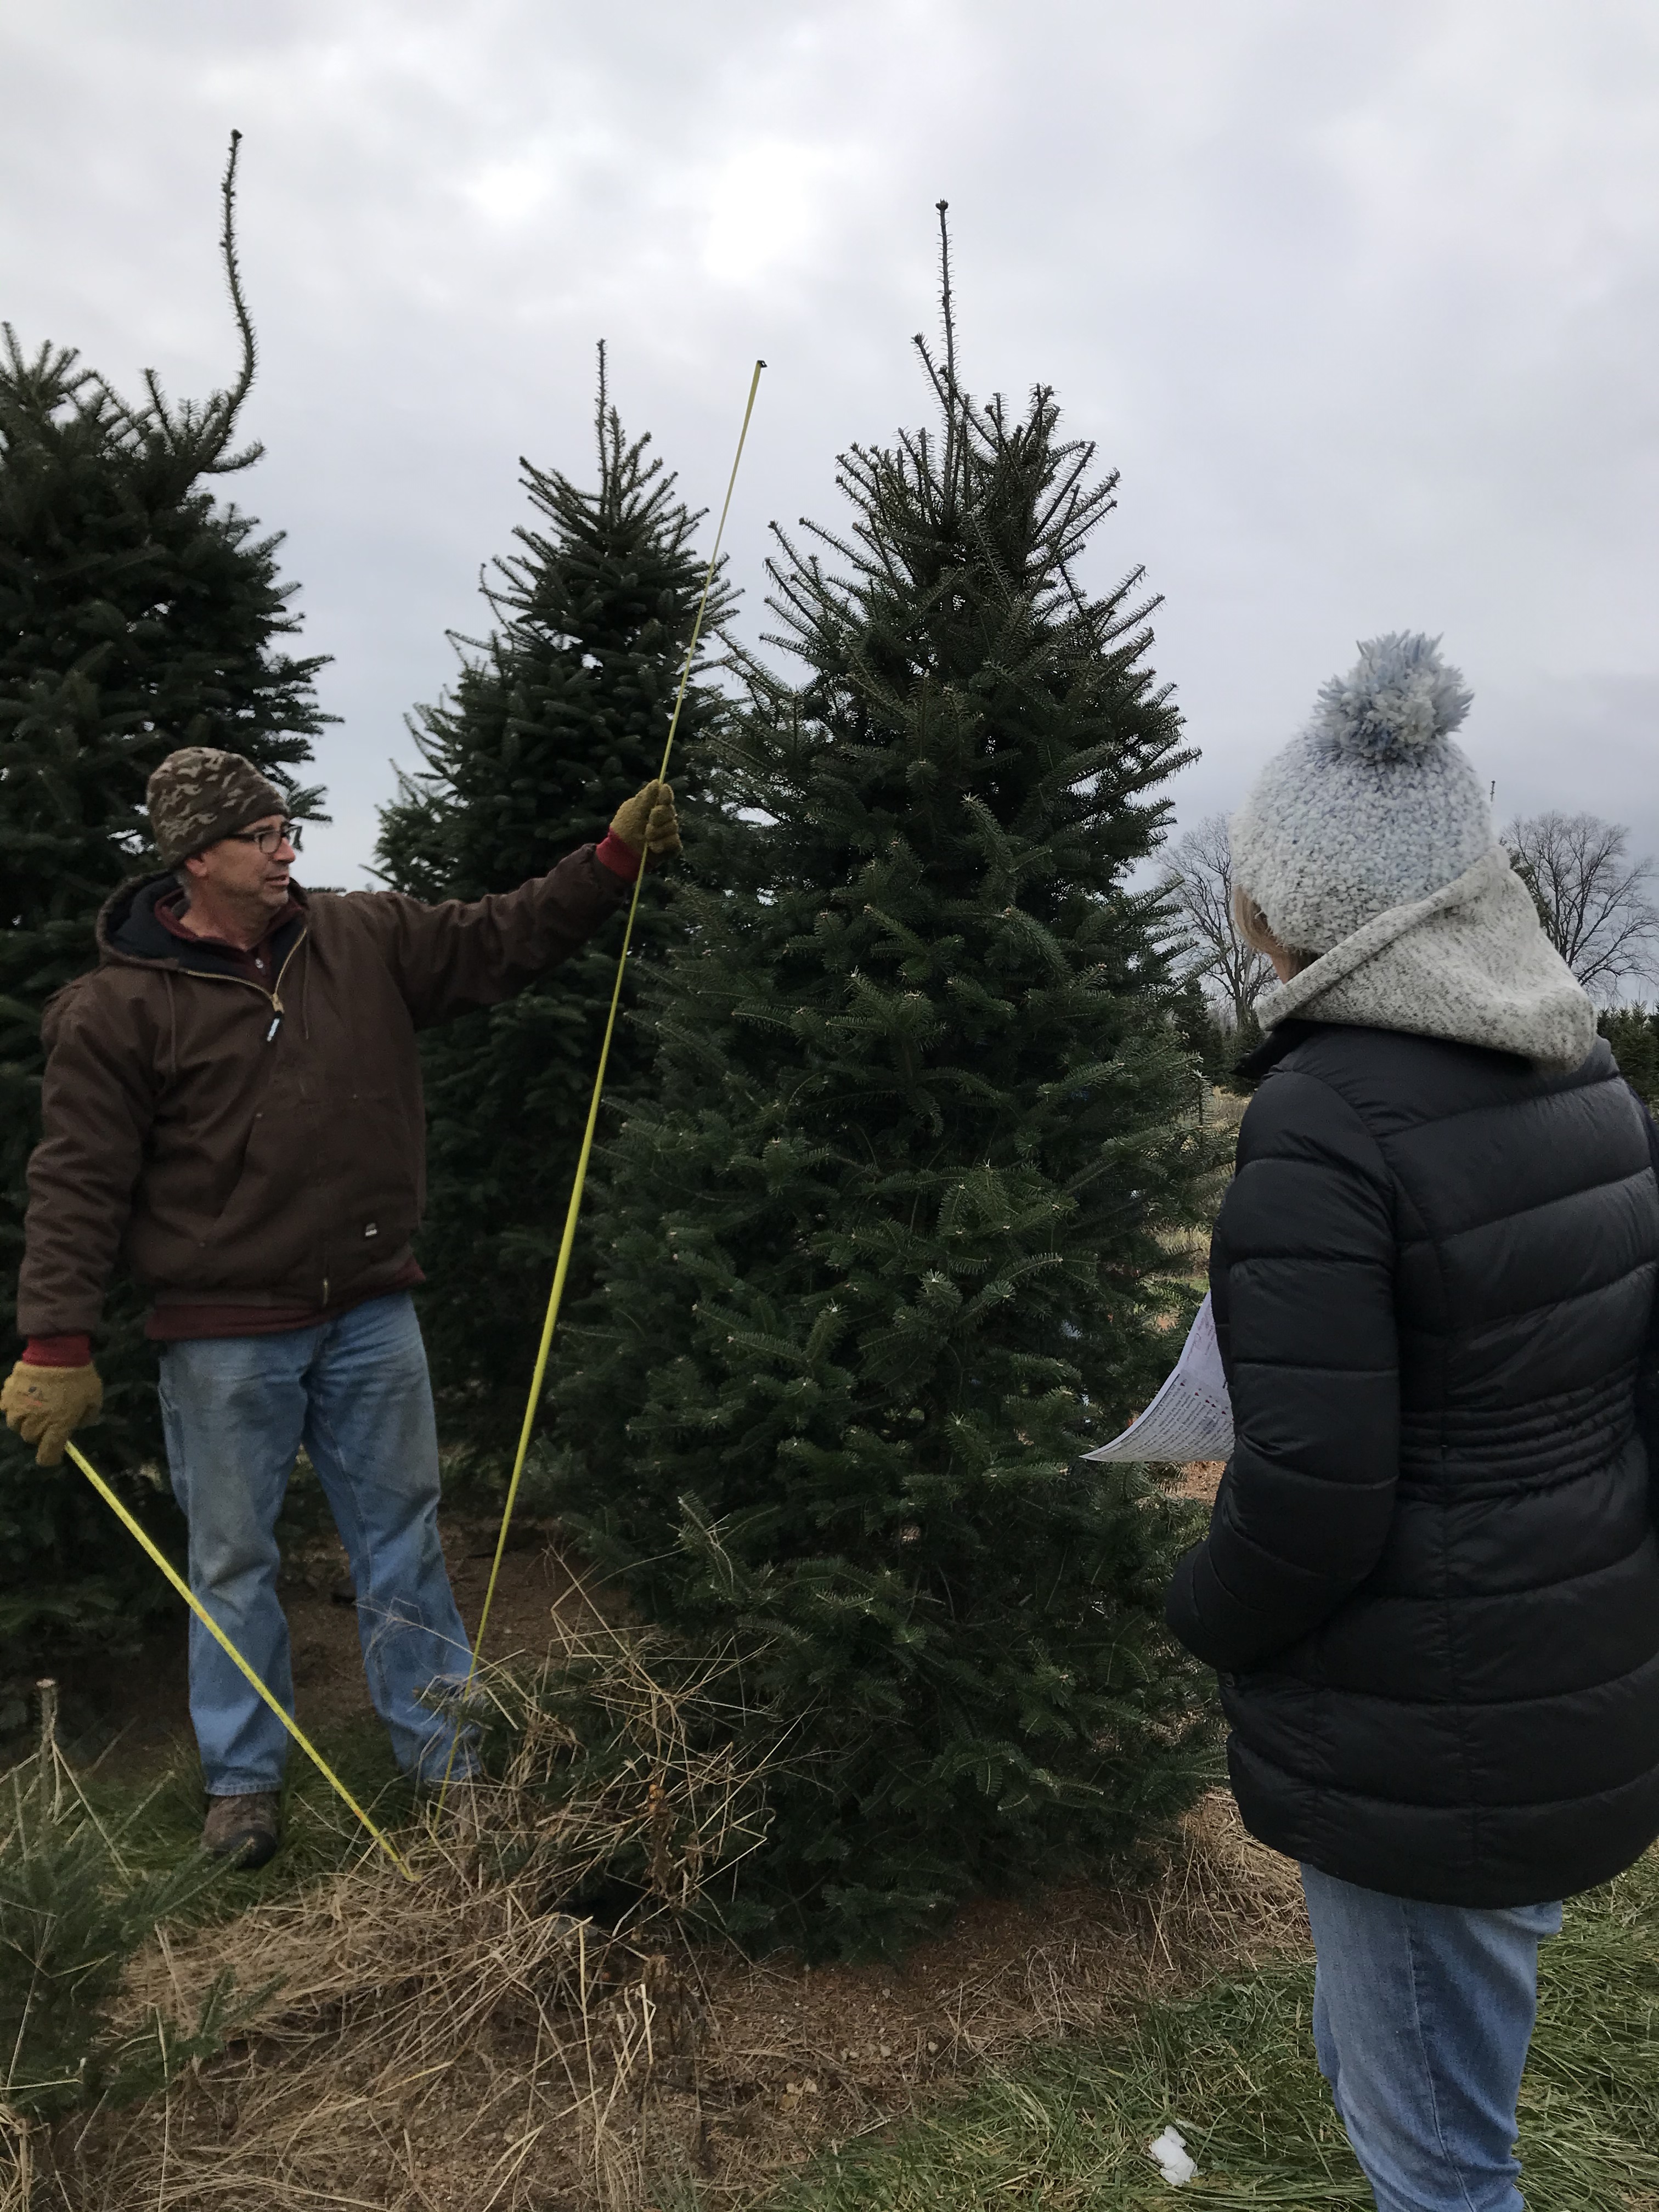 A man measures a Christmas tree with measuring tape.